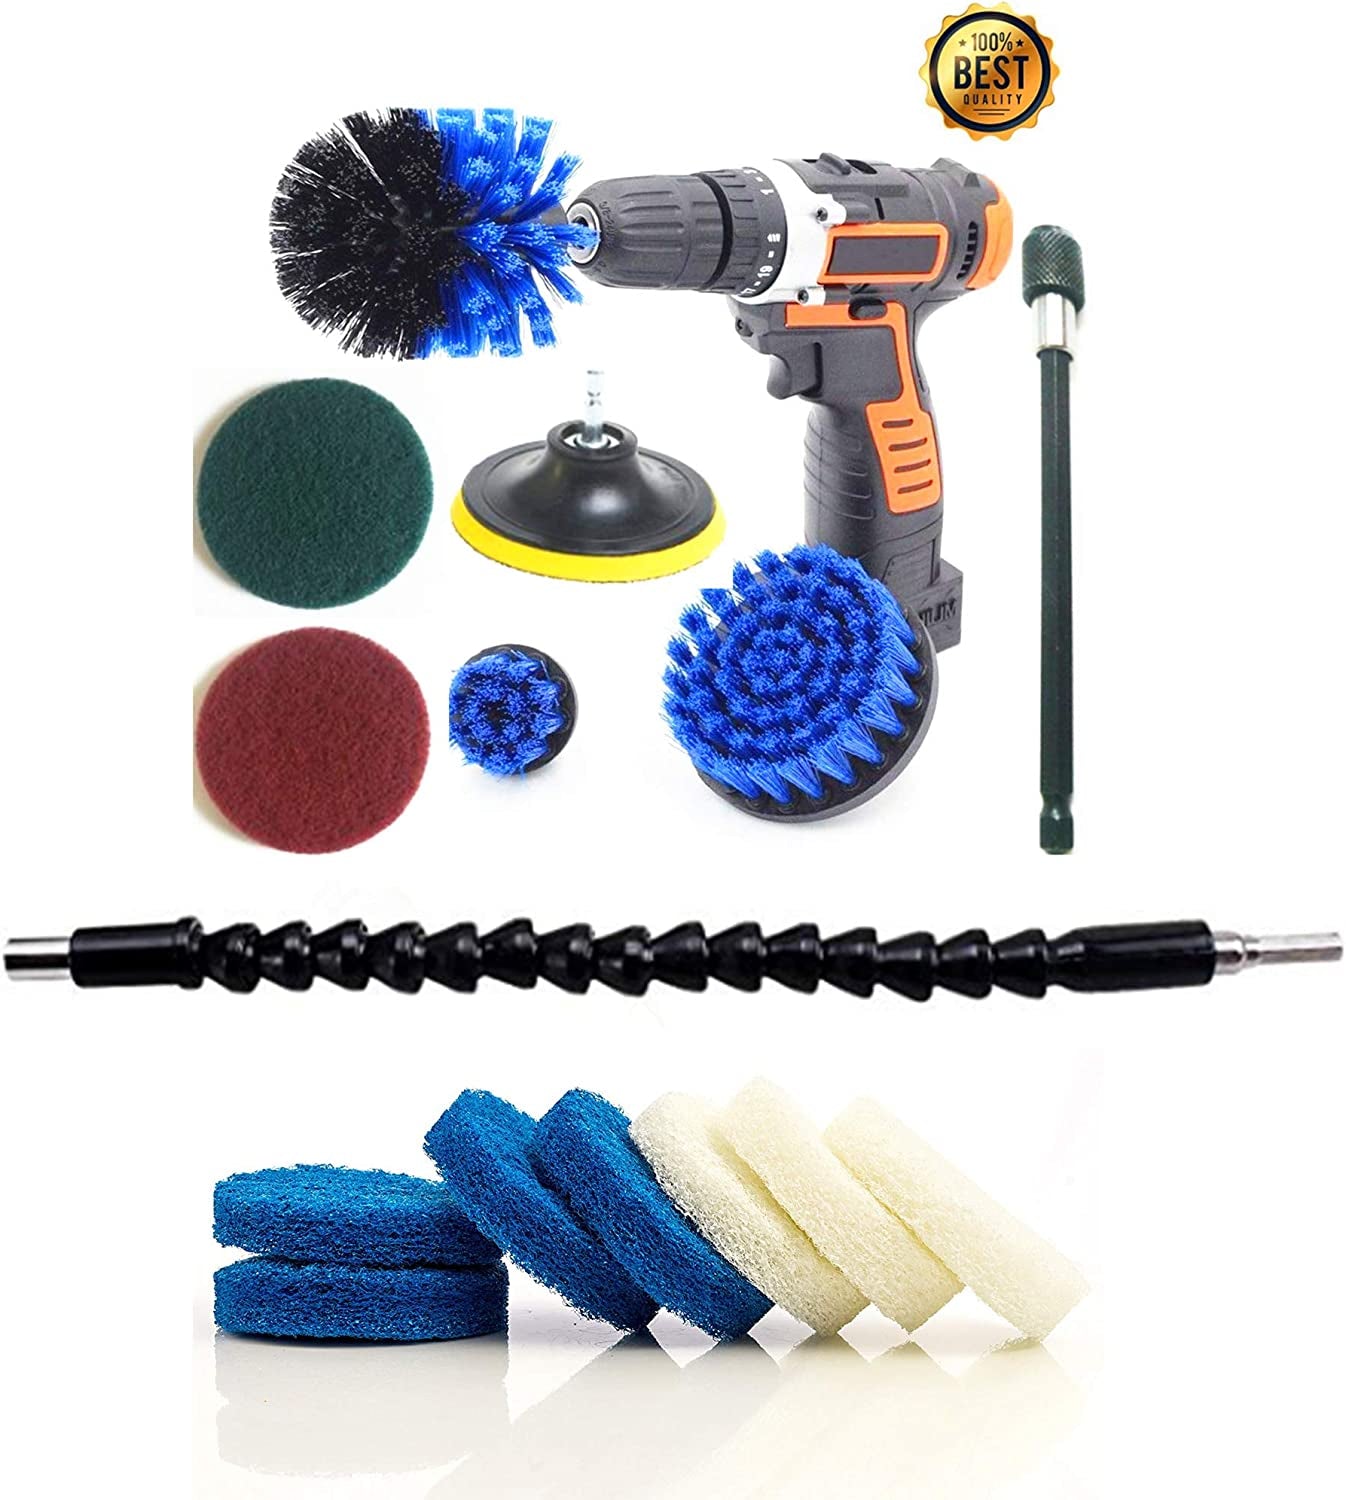 Drill Brush Power Scrubber Cleaning Set, 15 Piece Cleaner Scrubbing Brushes Attachments for Home Kitchen, Bathroom Surface, Carpet, Grout, Tile, Tub, Shower, Kitchen, Auto, Indoor